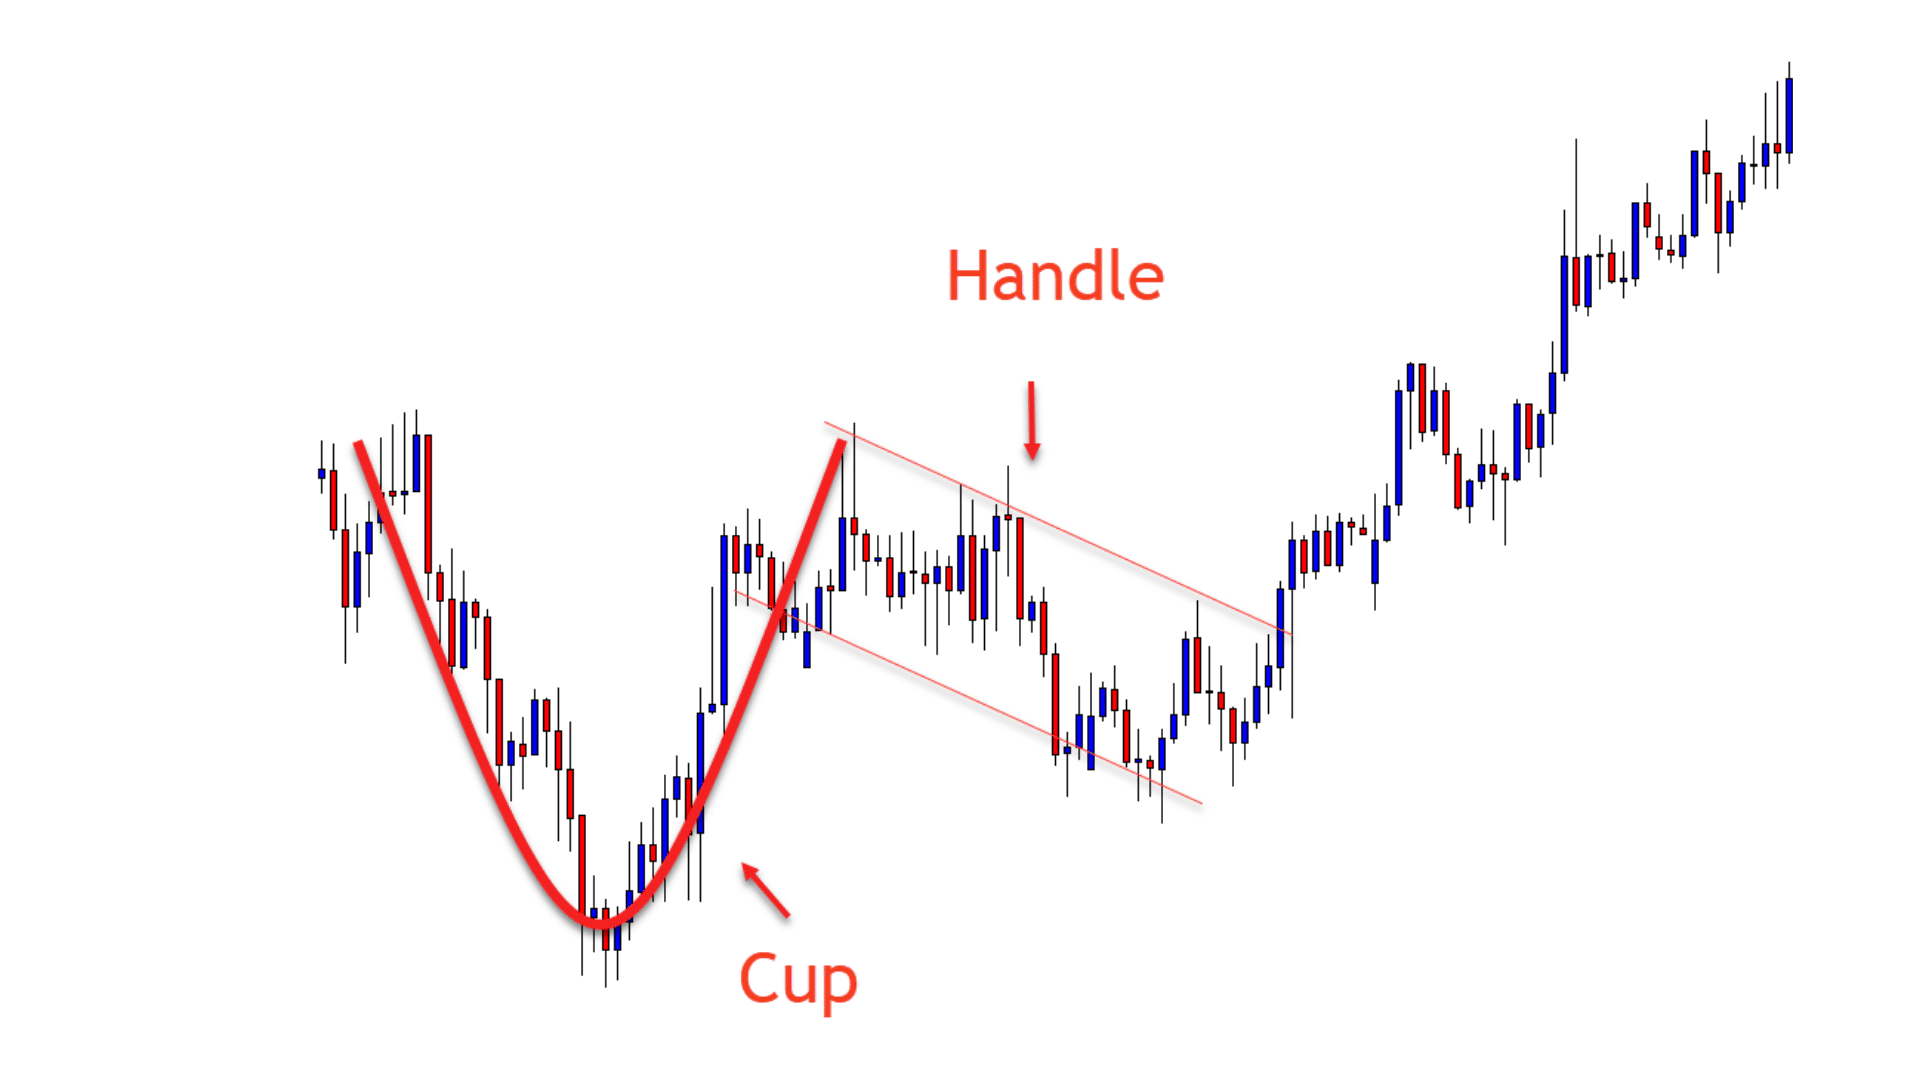 Trading with the Cup and Handle Pattern